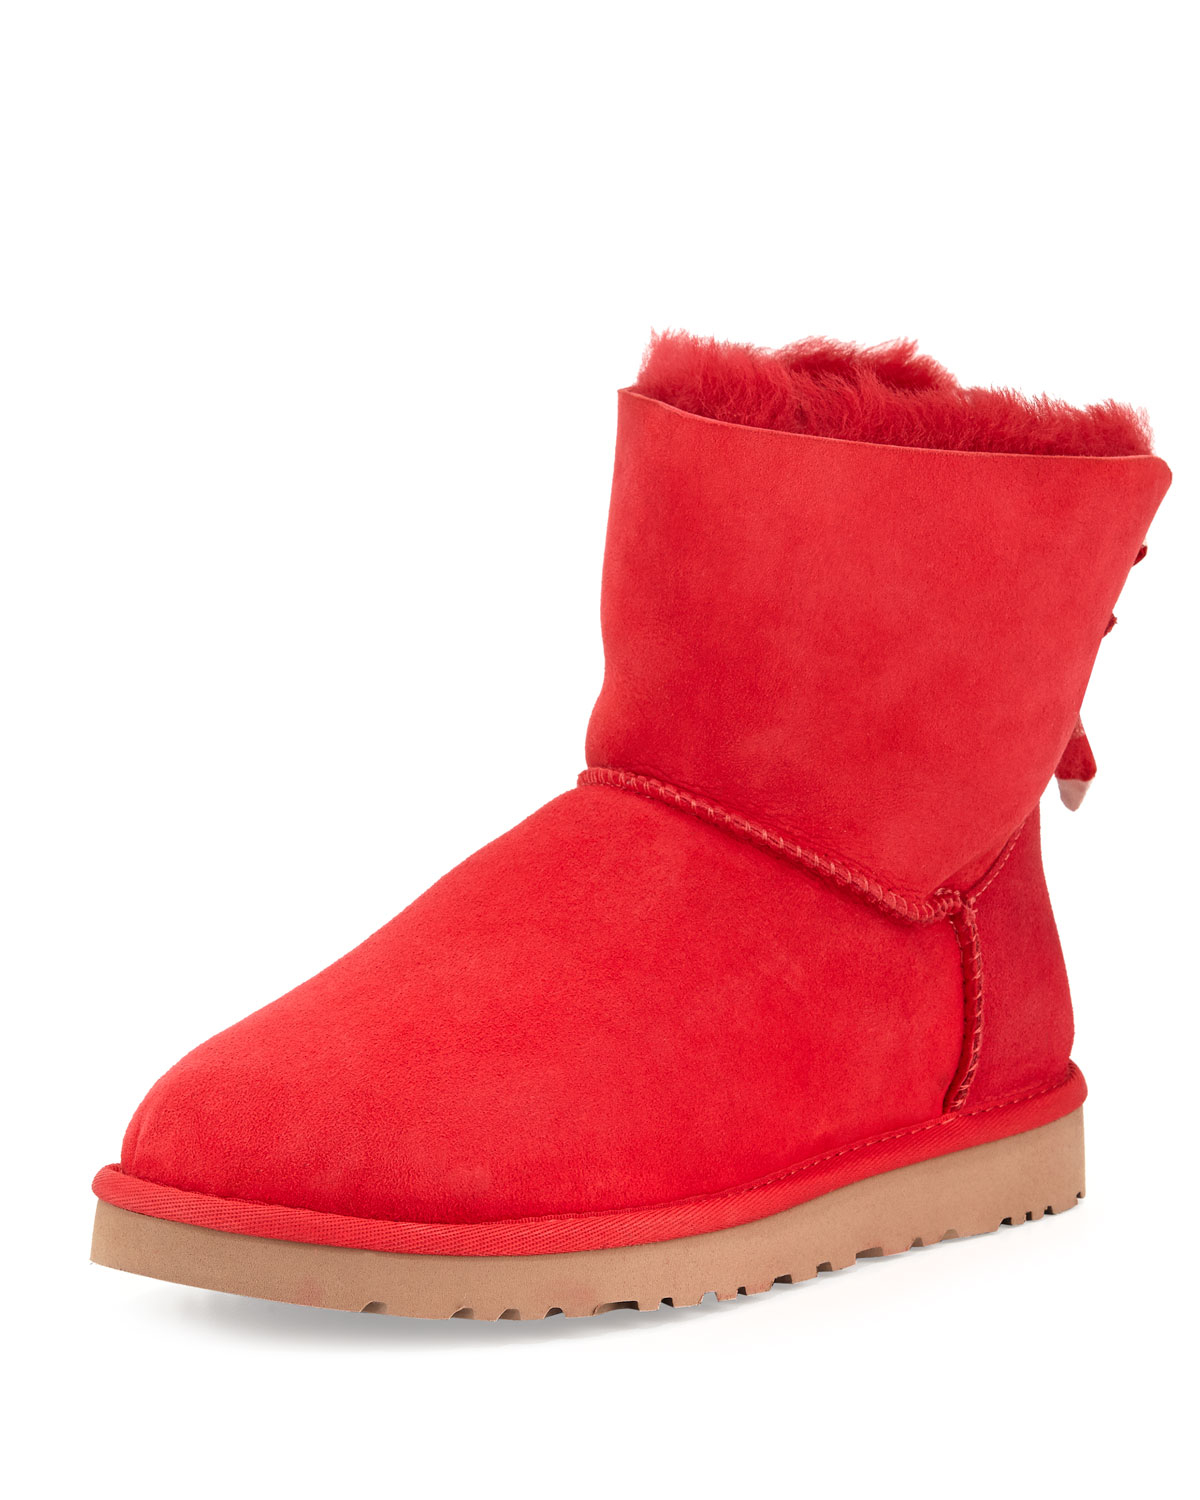 bright red uggs